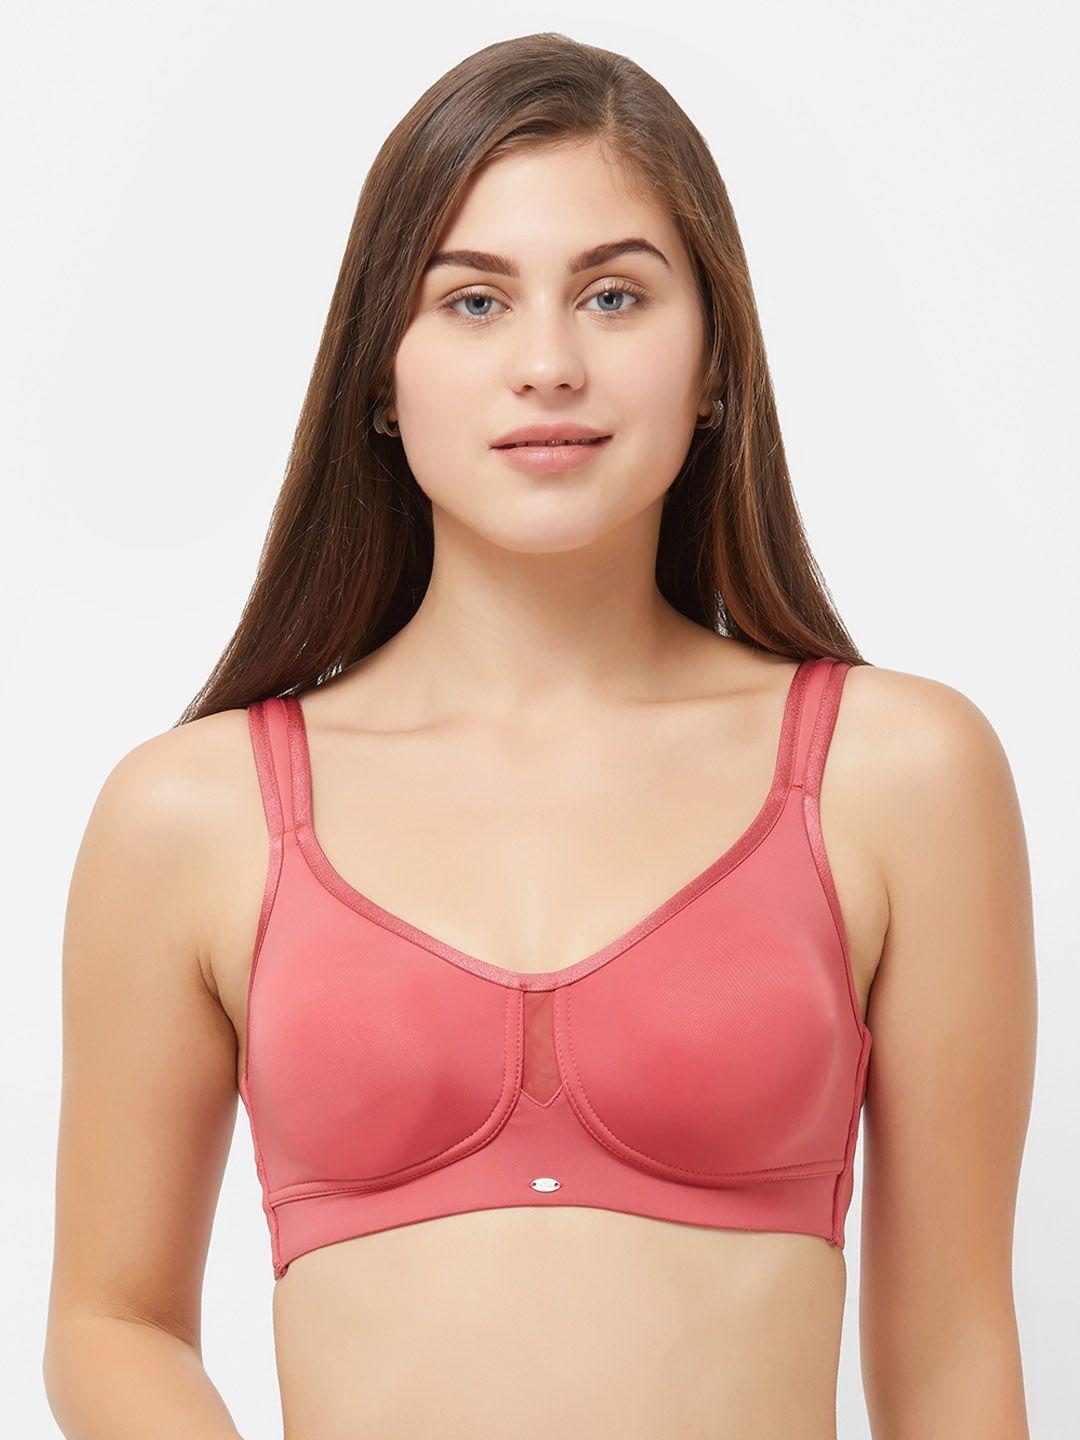 soie red solid non-wired non padded minimizer bra cb-328claret